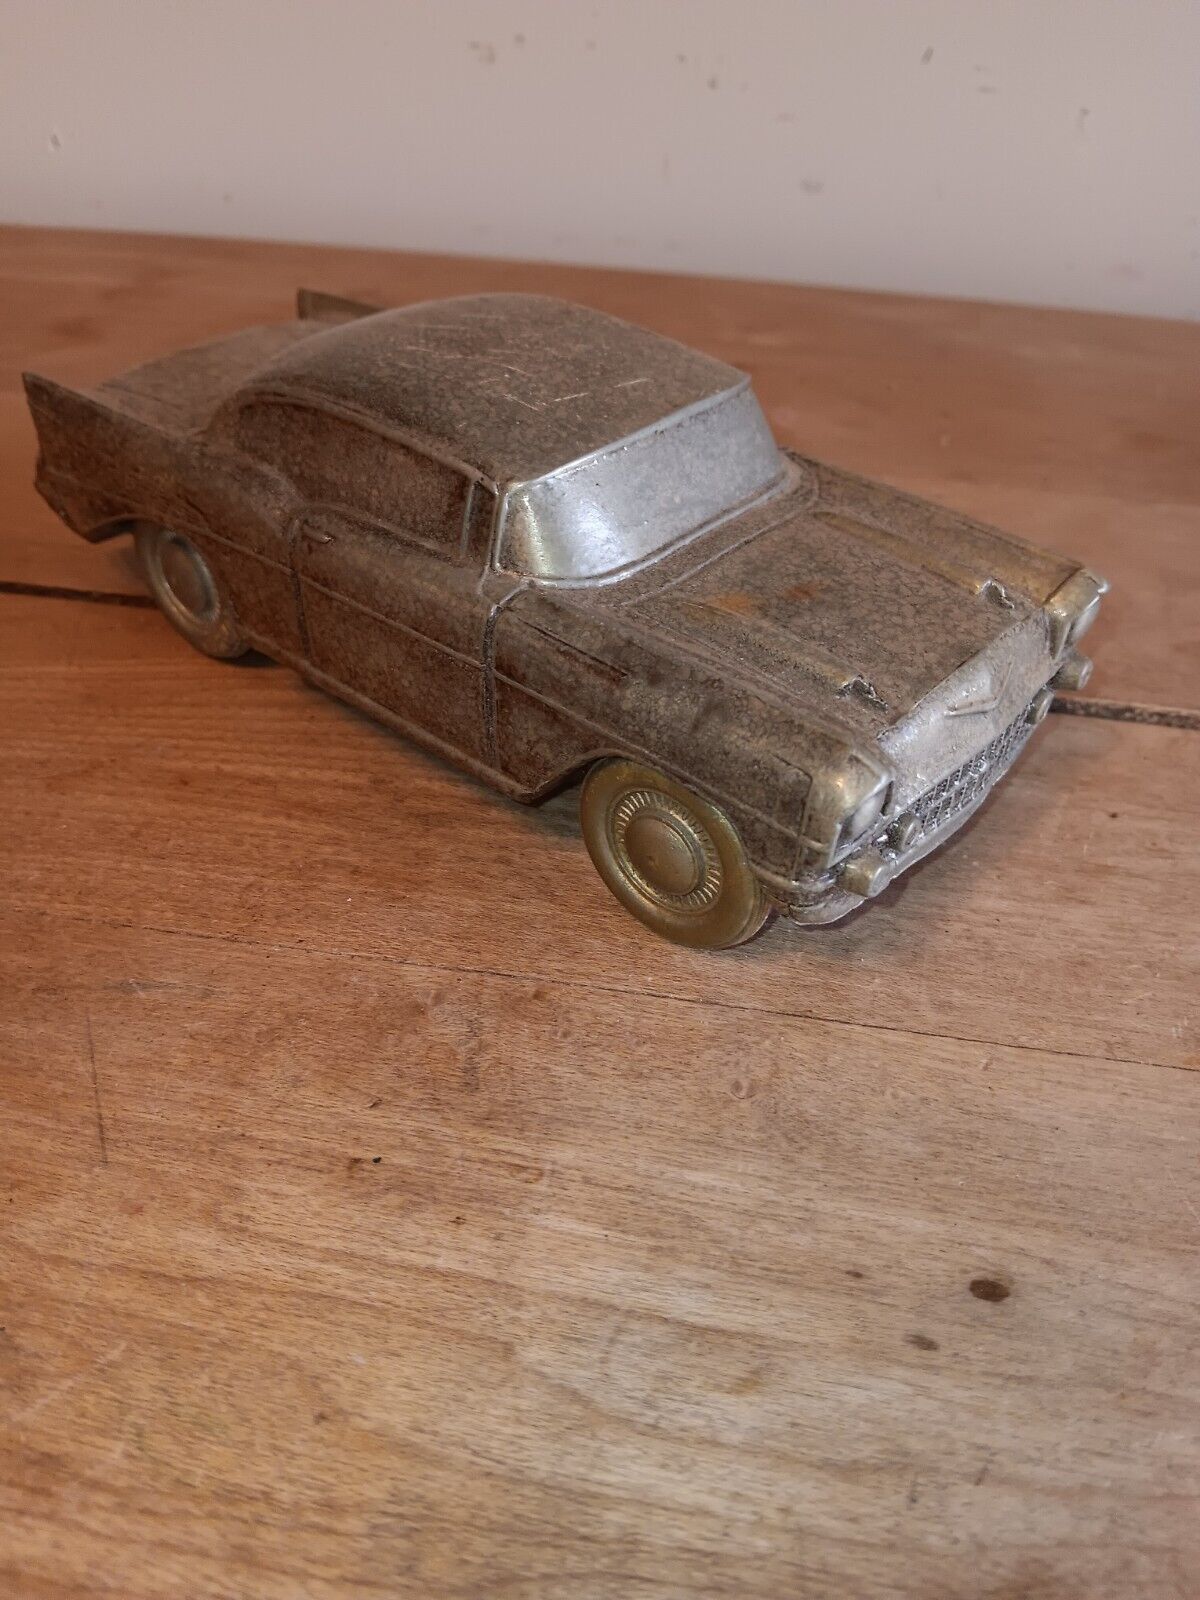 Vintage 1974 Banthrico Coin Bank Metal Car Toy Chevy Bel Air